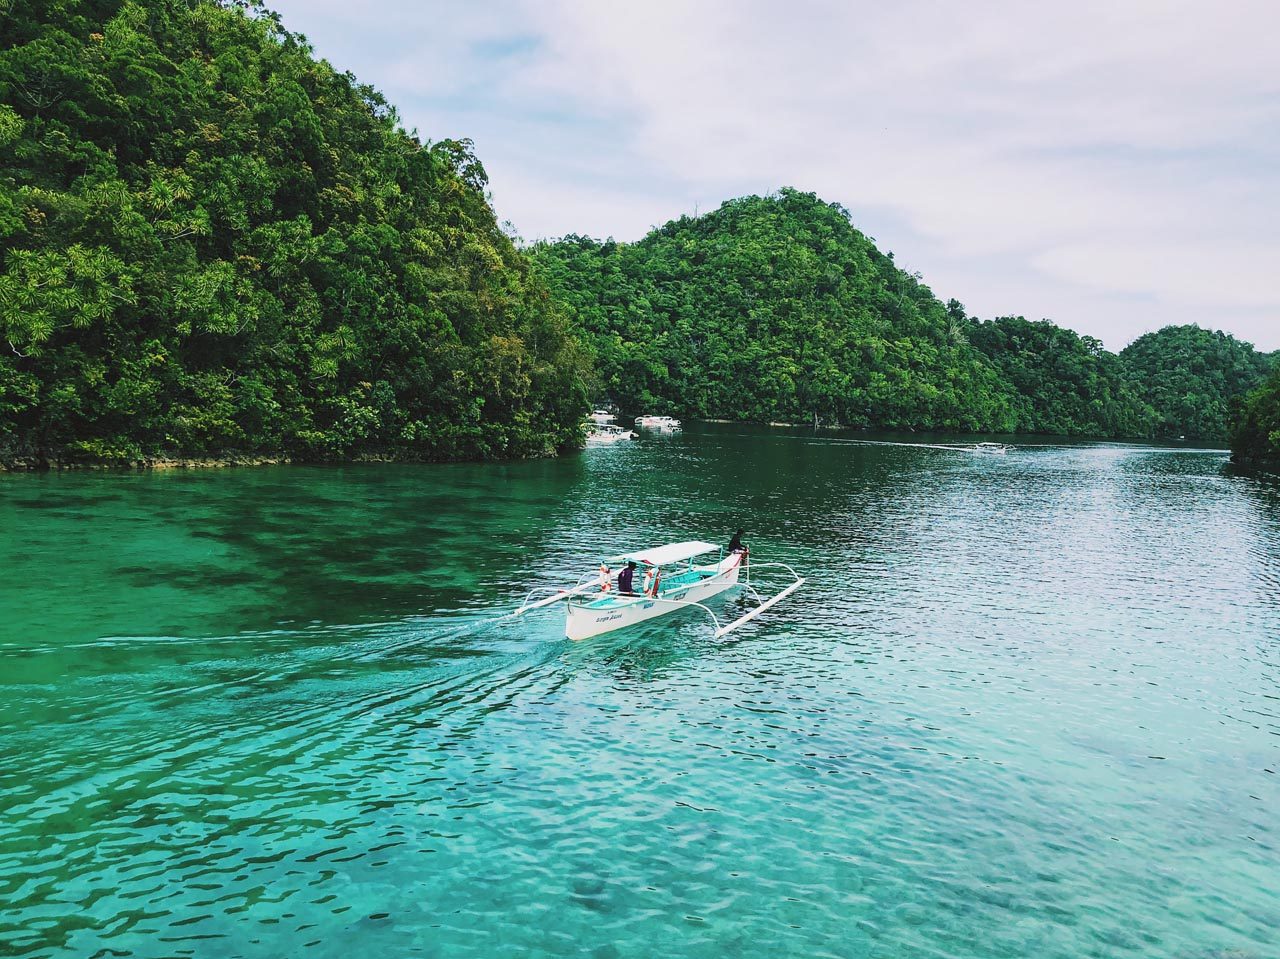 Eats and treats: Why Siargao is an adventurer’s haven